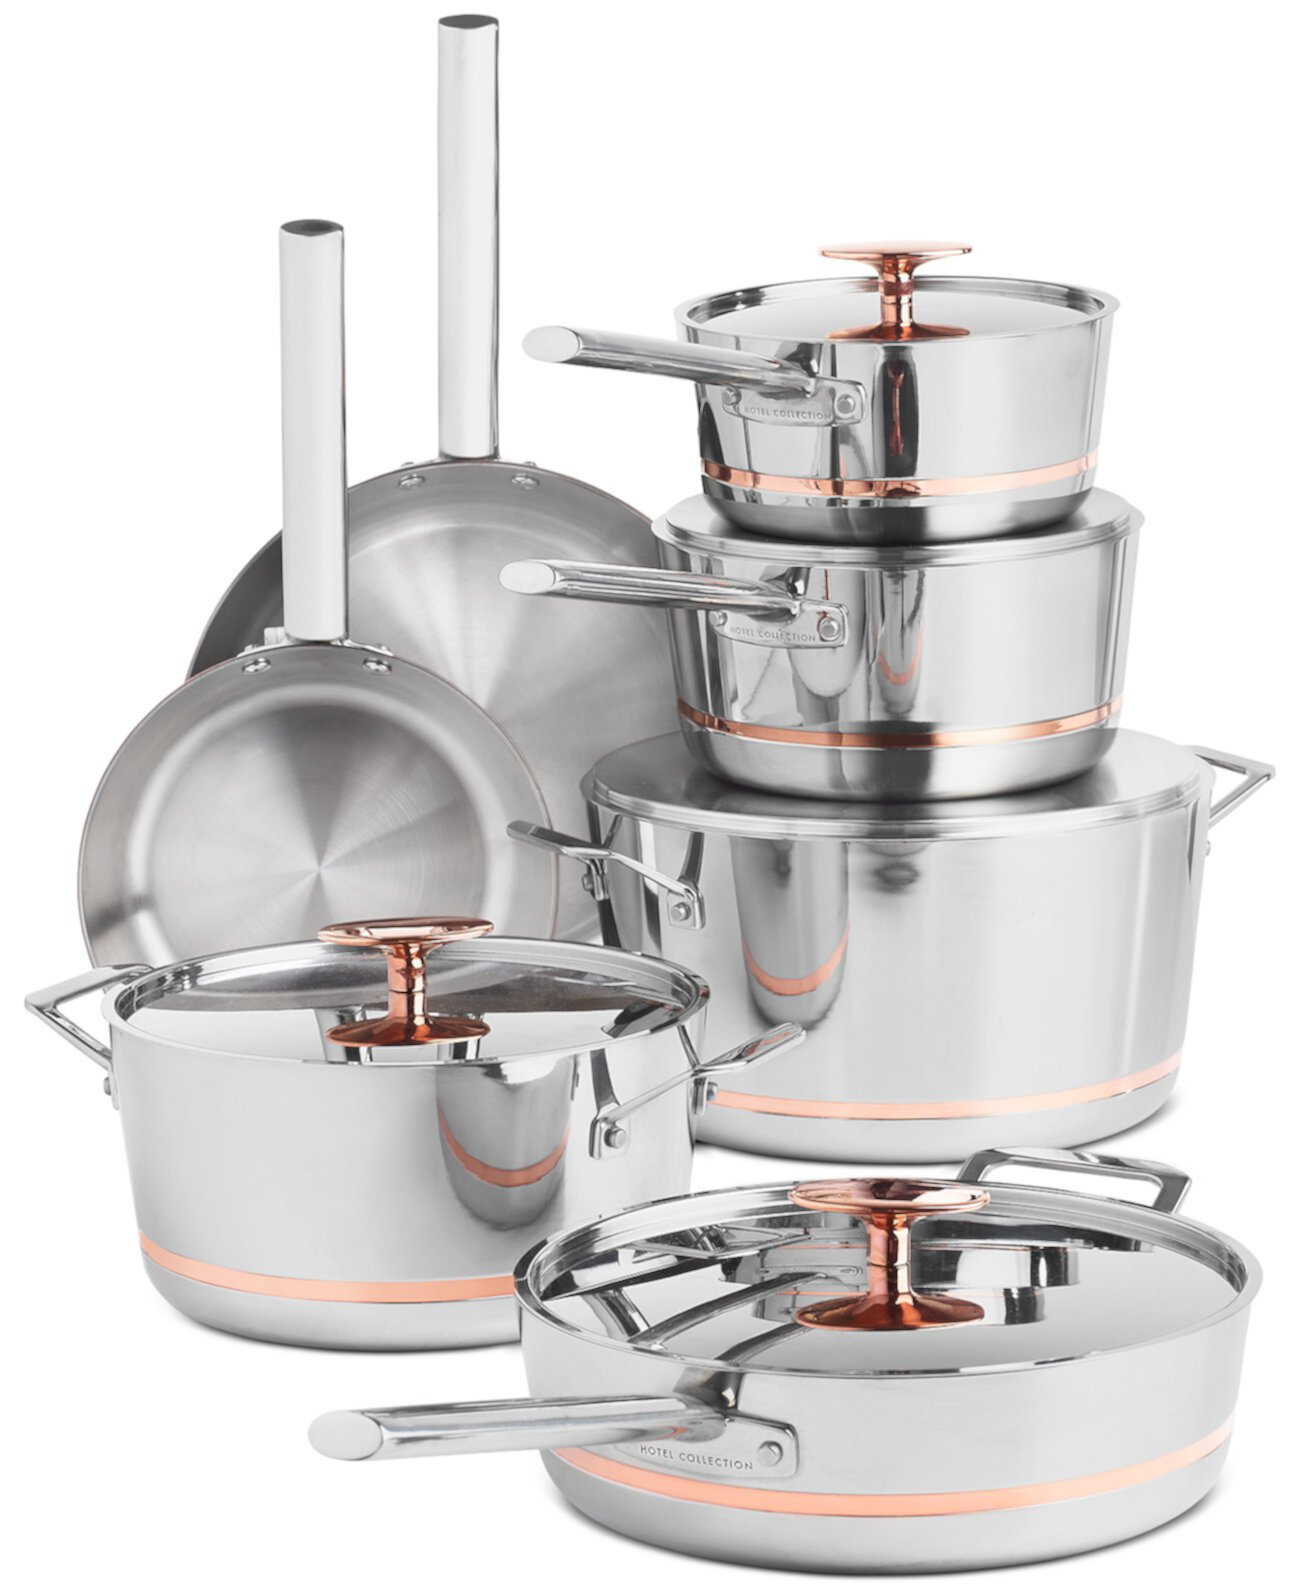 12-Pc. Stainless Steel with Copper Core Cookware Set, Created for Macy's Hotel Collection